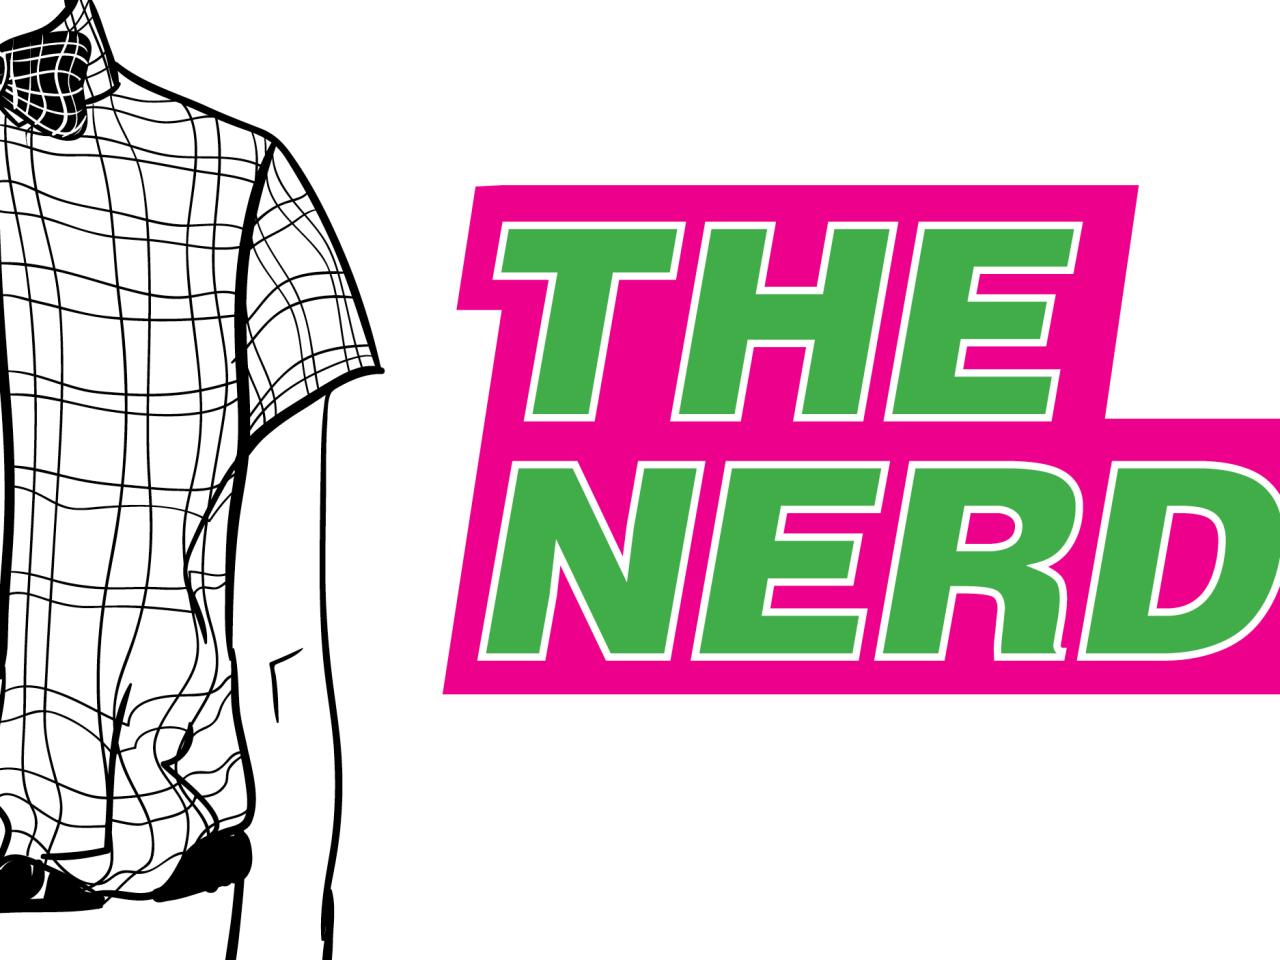 A black and white drawing of a plaid shirt with a bowtie next to the play title "The Nerd."